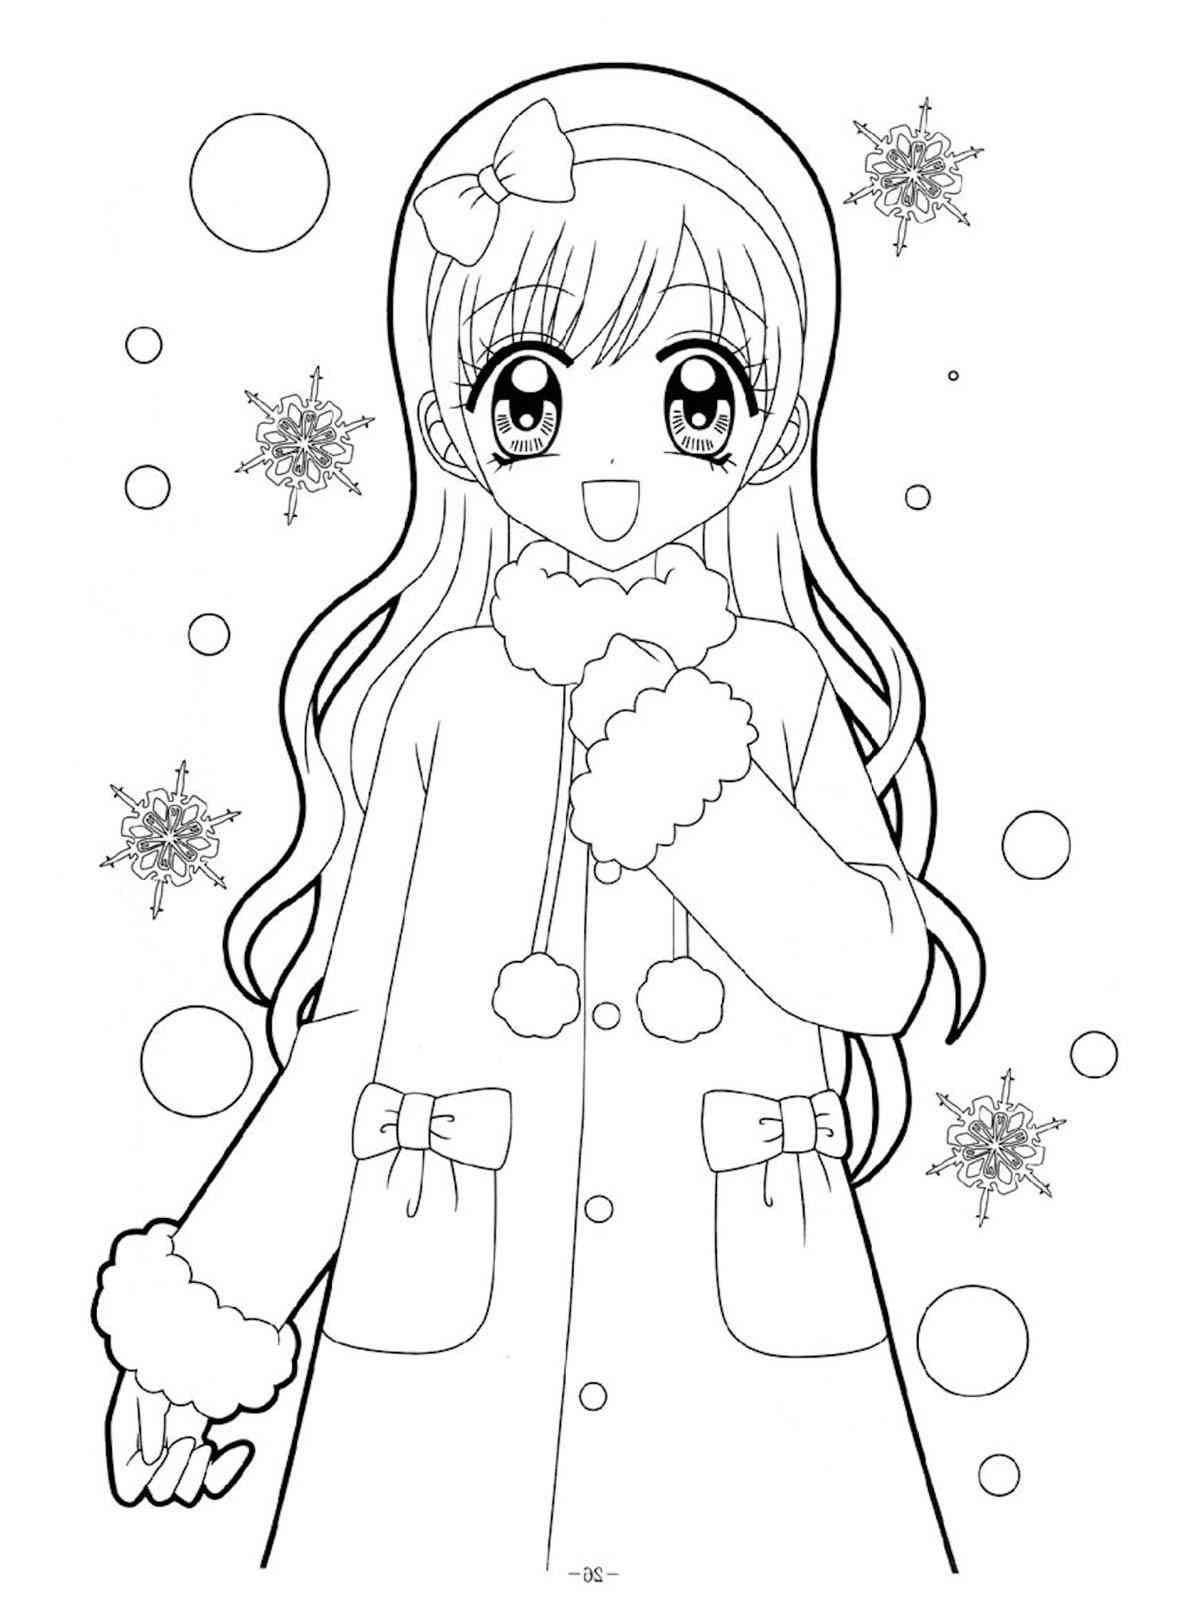 Cute Anime Girl Coloring Page Printable On Page Outline Sketch Drawing  Vector, Easy Manga Drawing, Easy Manga Outline, Easy Manga Sketch PNG and  Vector with Transparent Background for Free Download